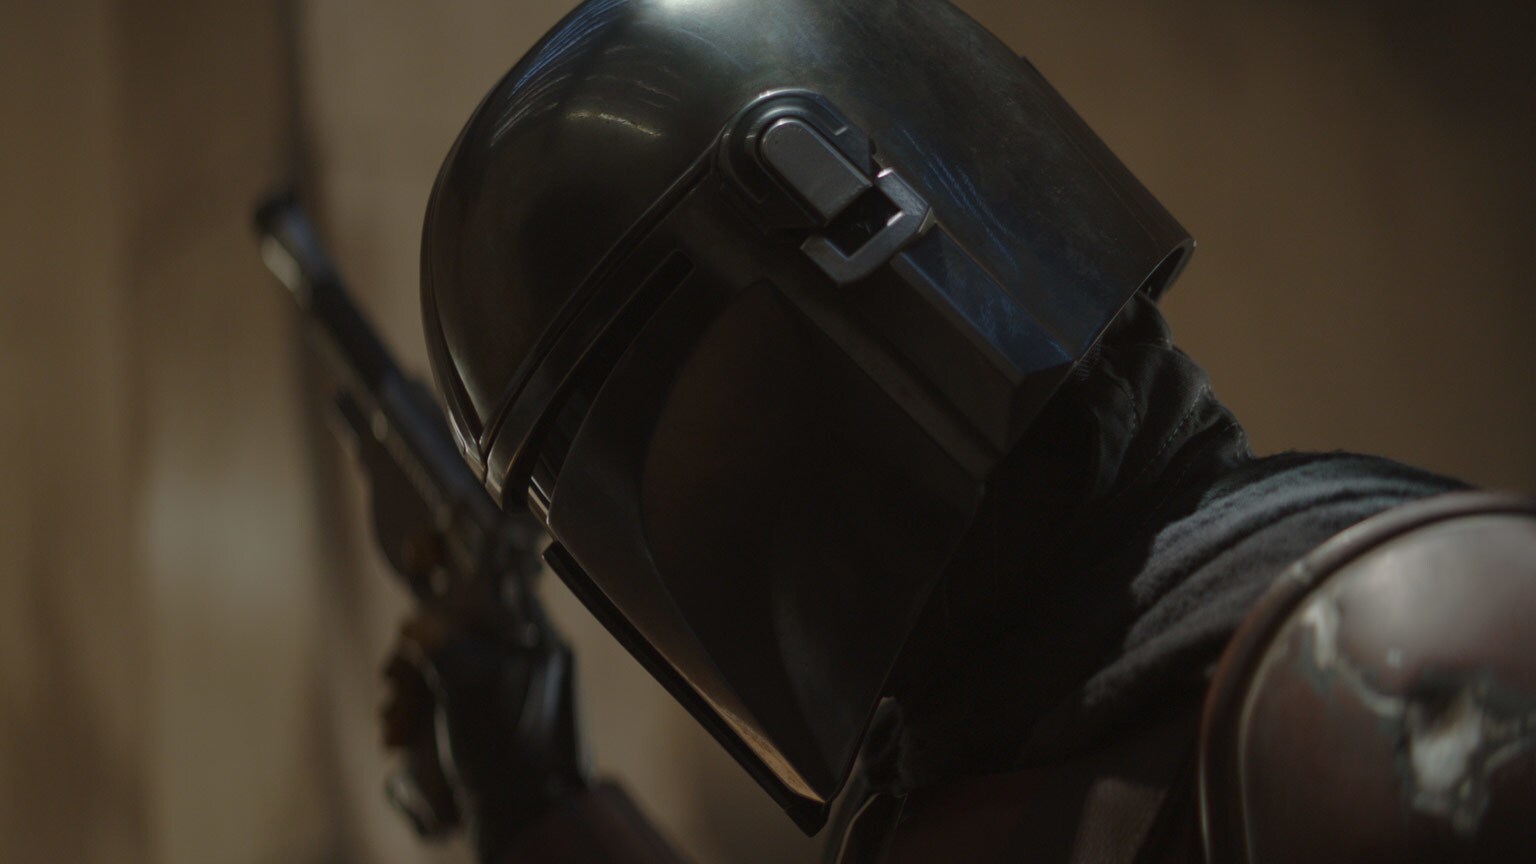 Poll: Which Star Wars Character Has the Coolest Mandalorian Armor?